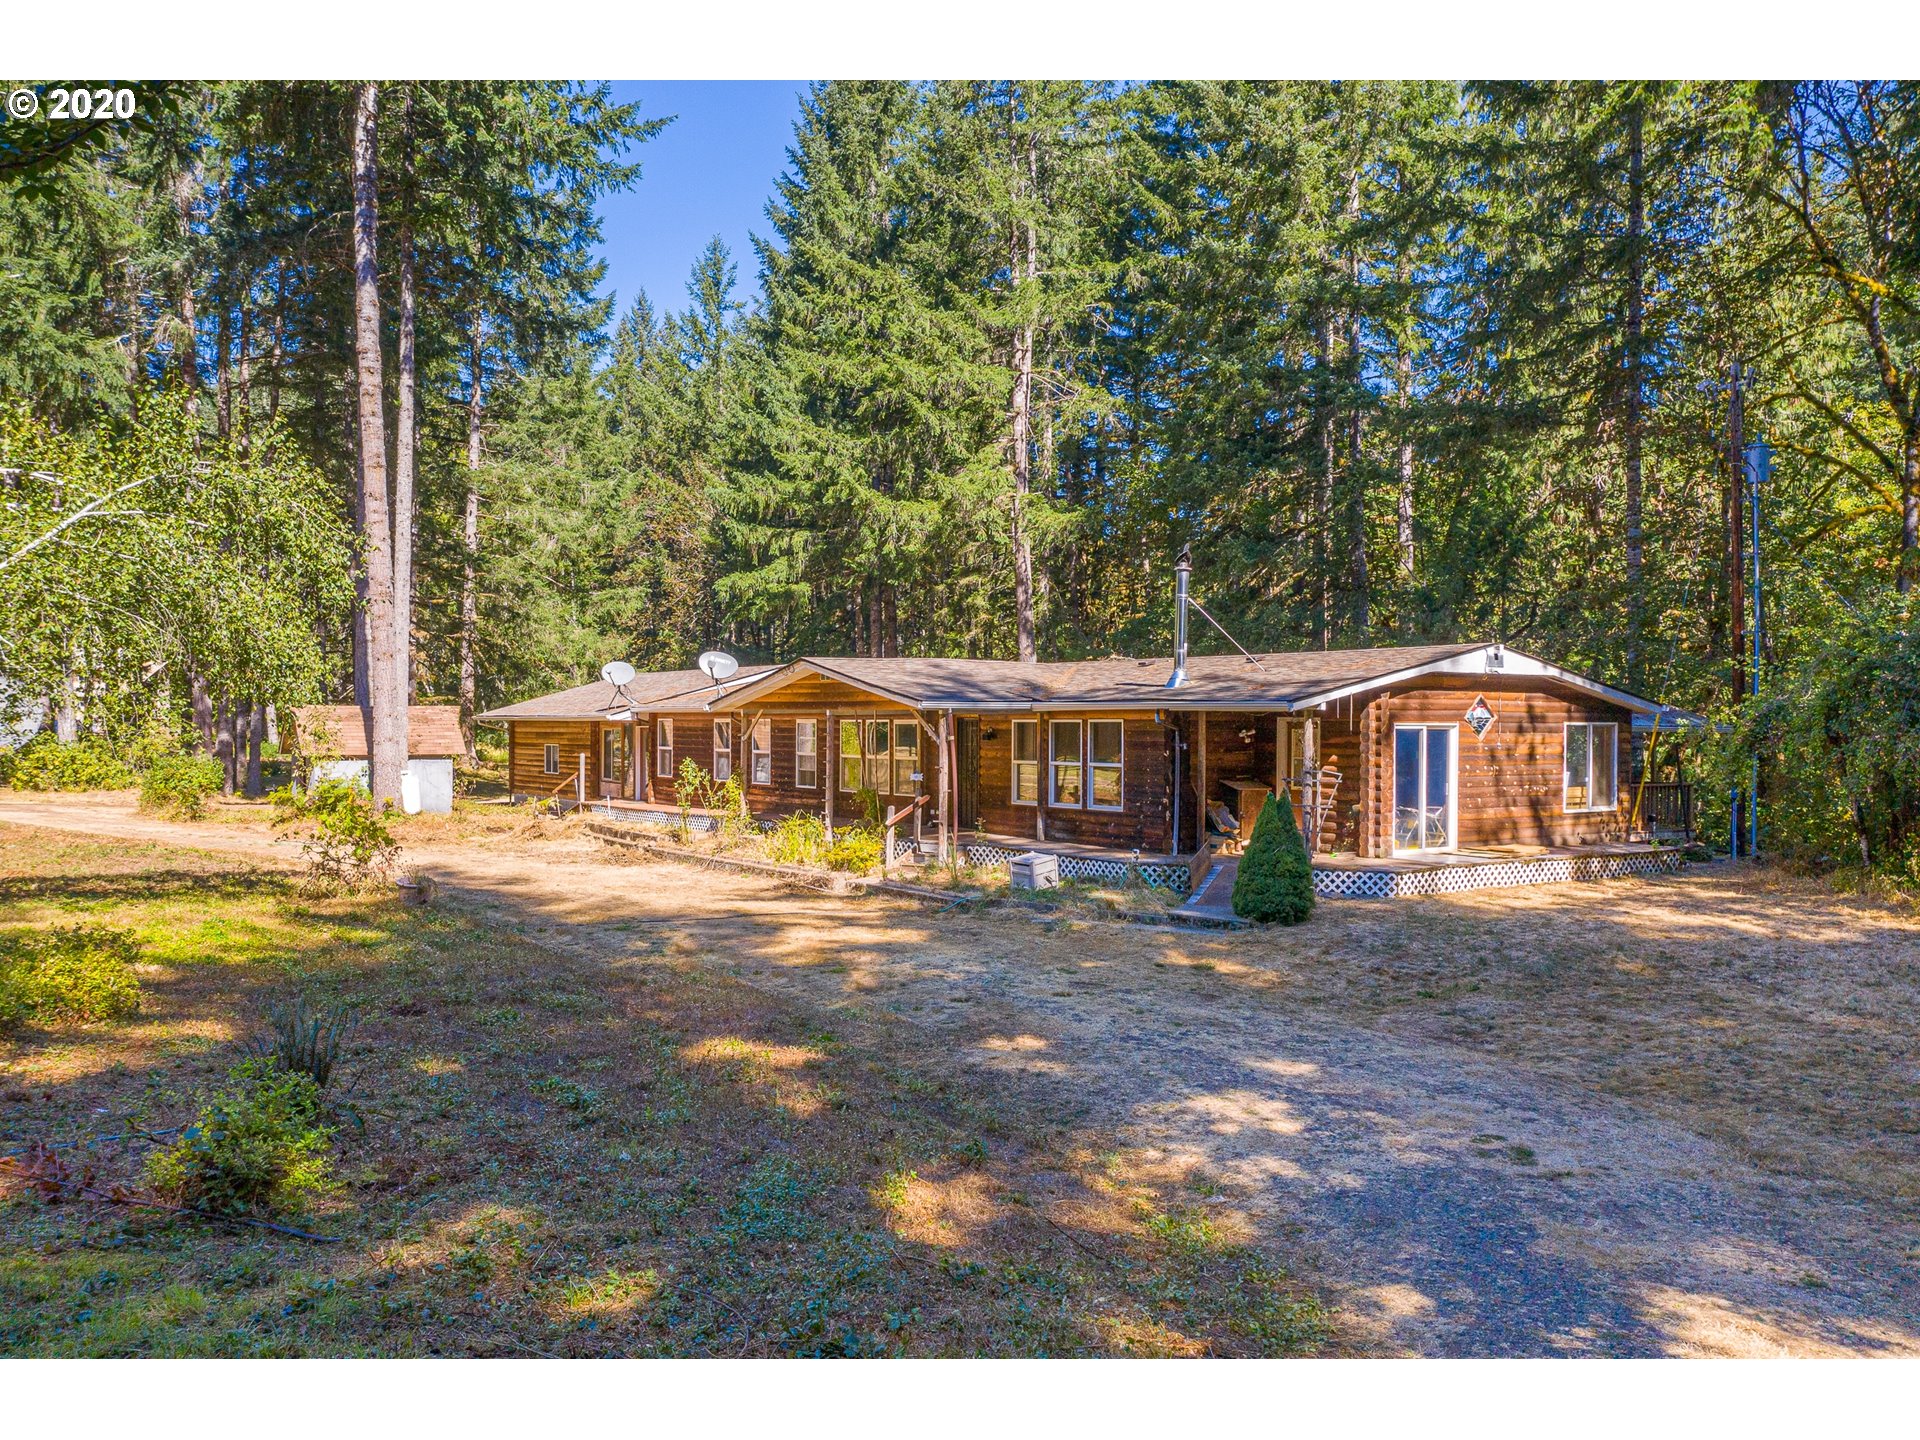 42328 WINBERRY CREEK RD (1 of 32)